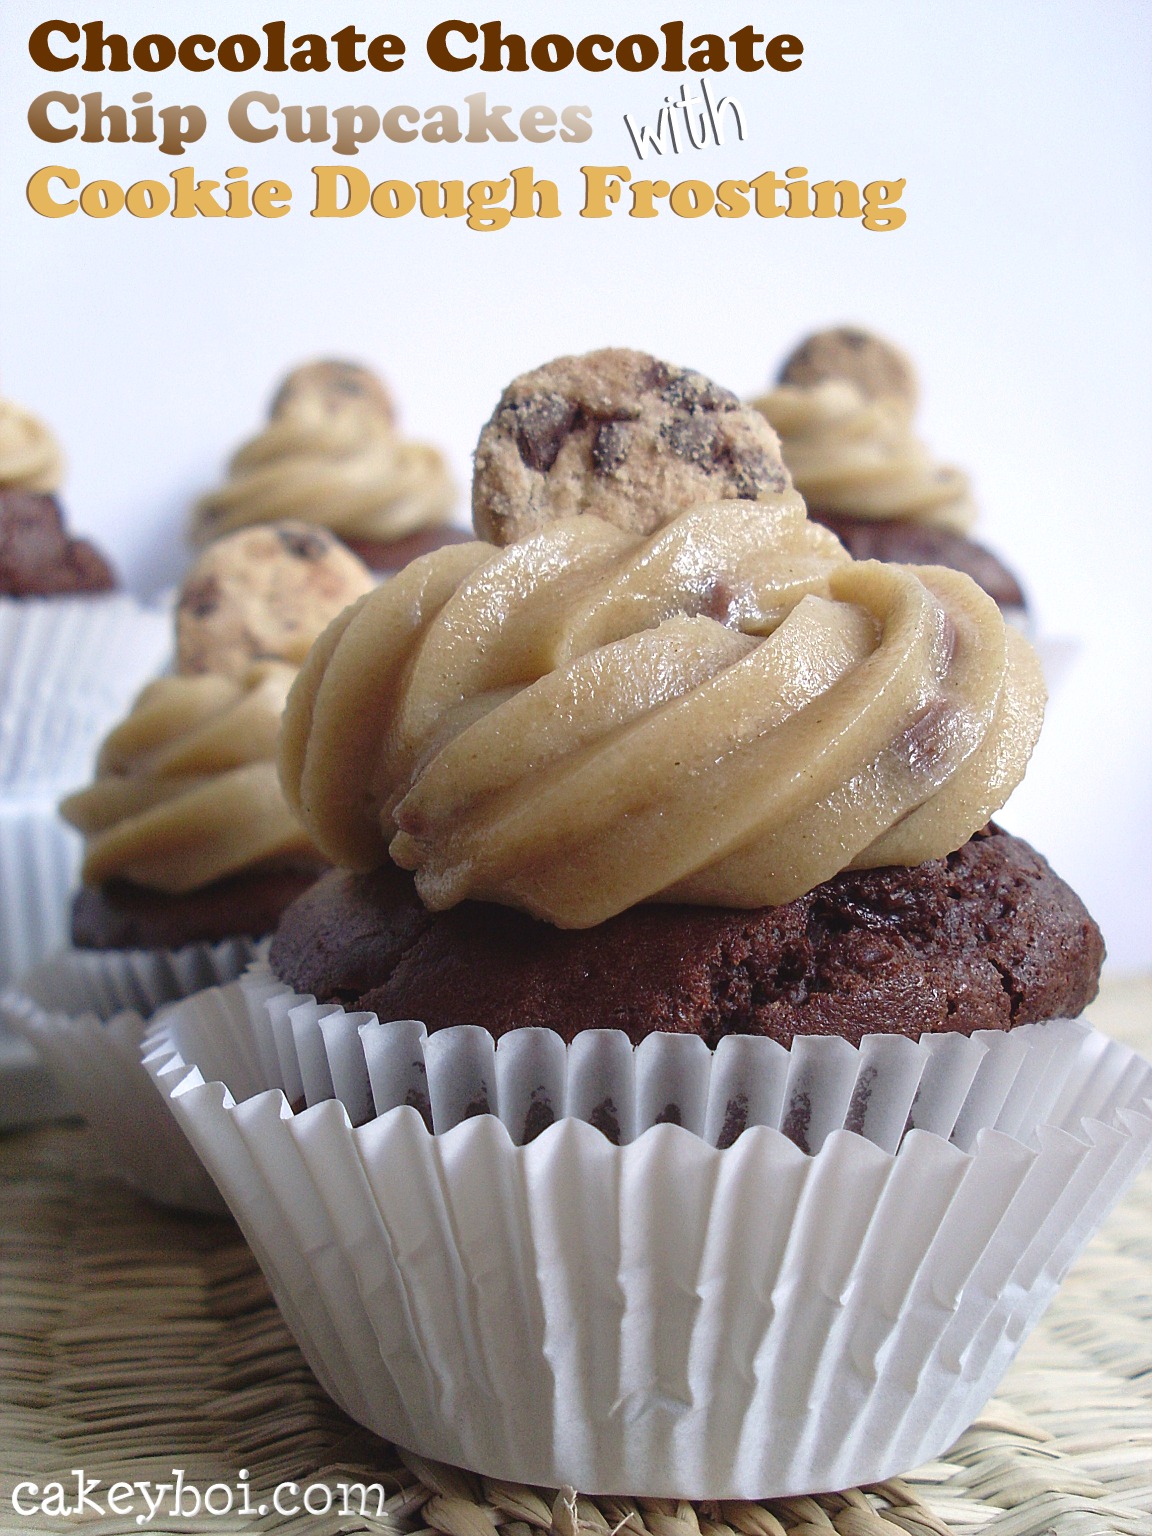 Chocolate Chip Cookie Dough Cupcakes with Cookie Dough 